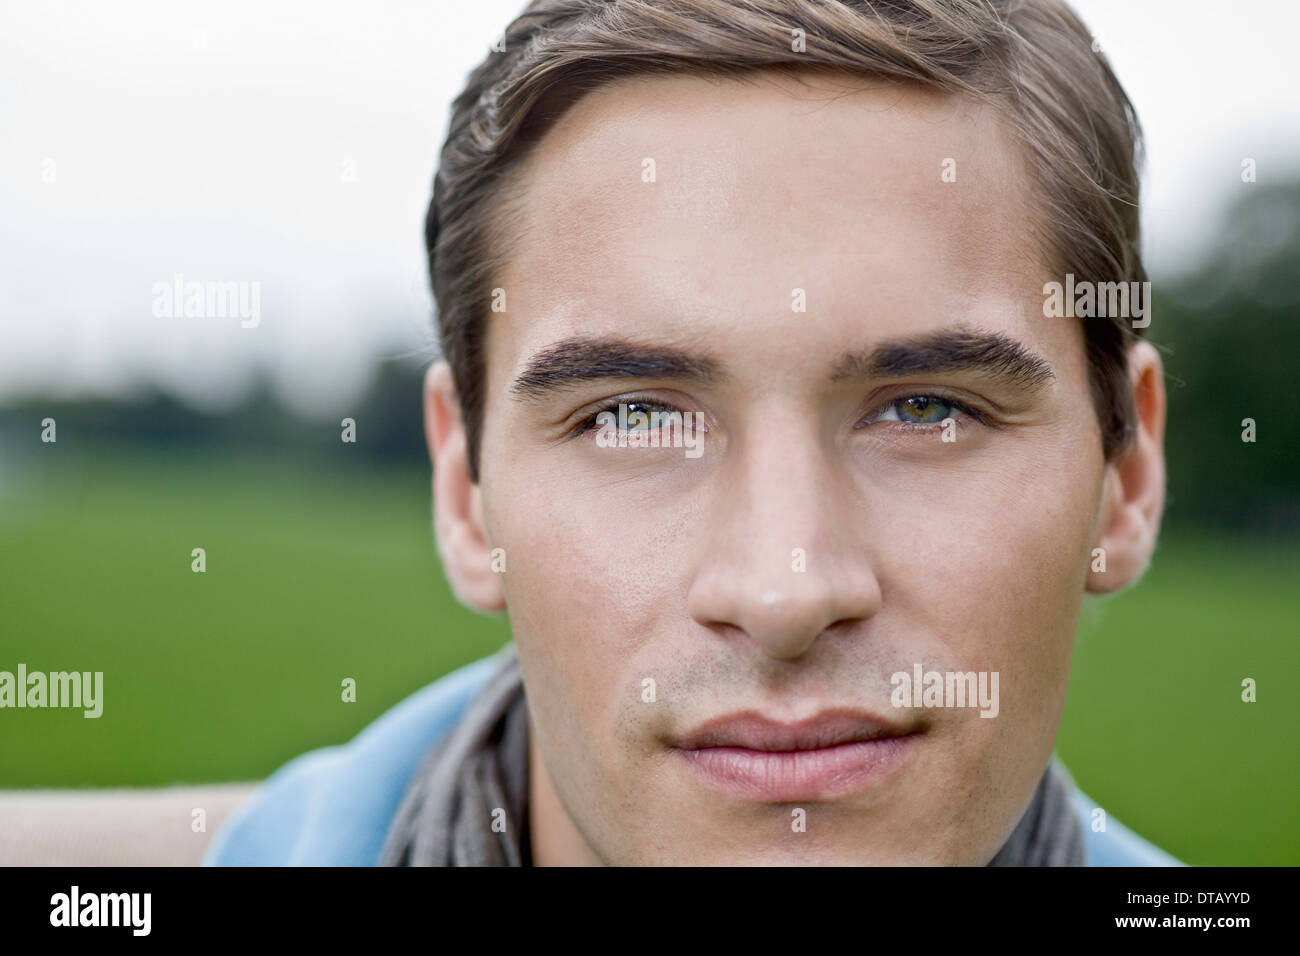 Portrait of young man, close-up Stock Photo